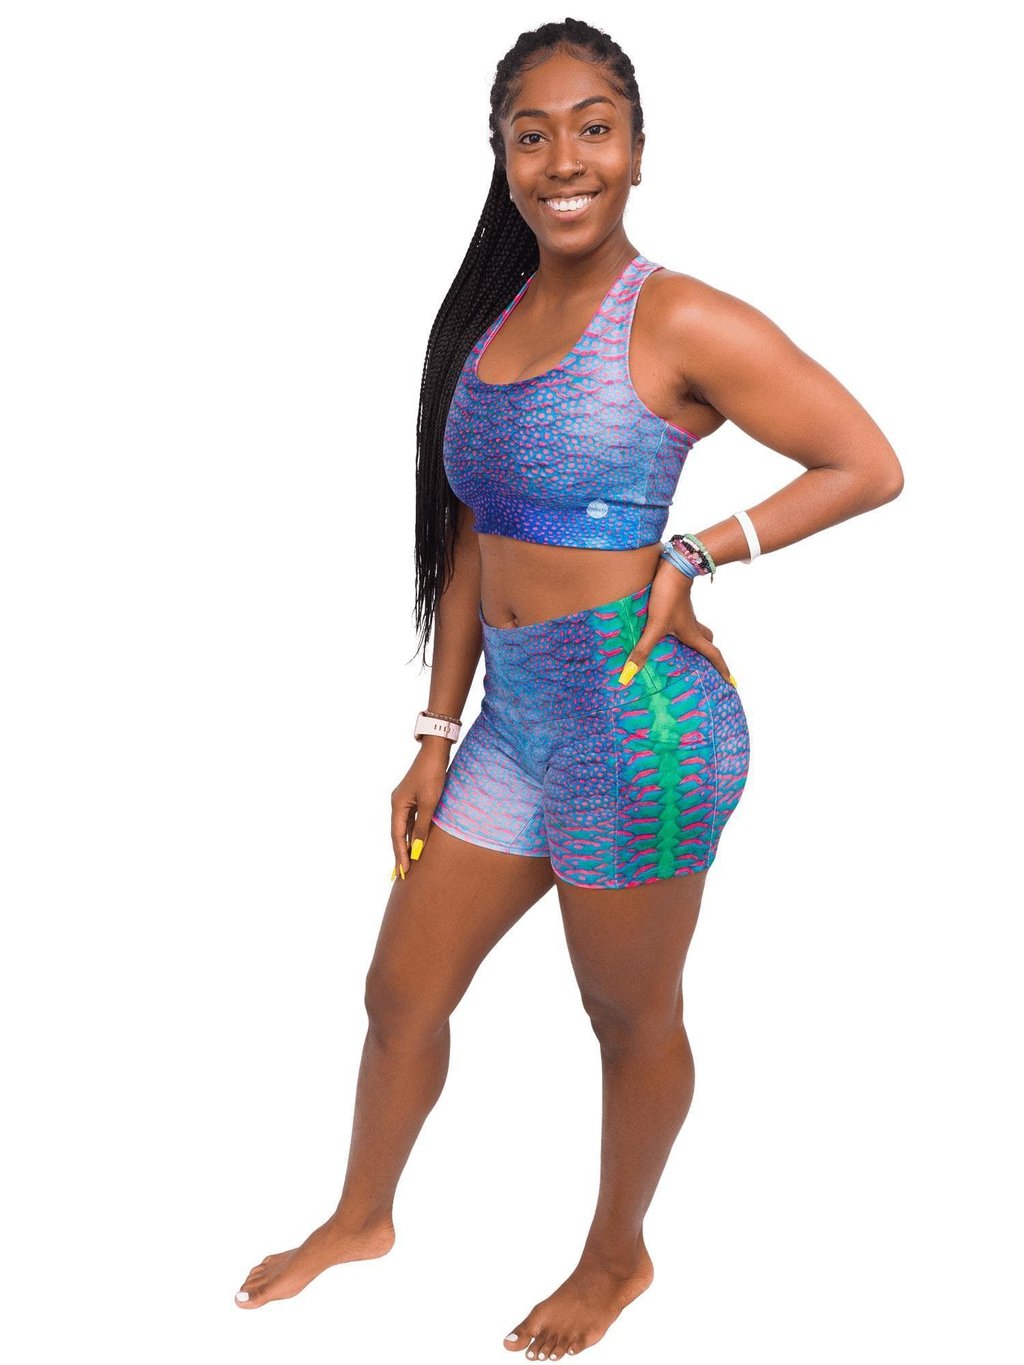 Model: Carlee is a shark &amp; sea turtle scientist and co-founder of Minorities in Shark Sciences. She is 5&#39;7&quot;, 145 lbs, 36C and is wearing a M short and S top.